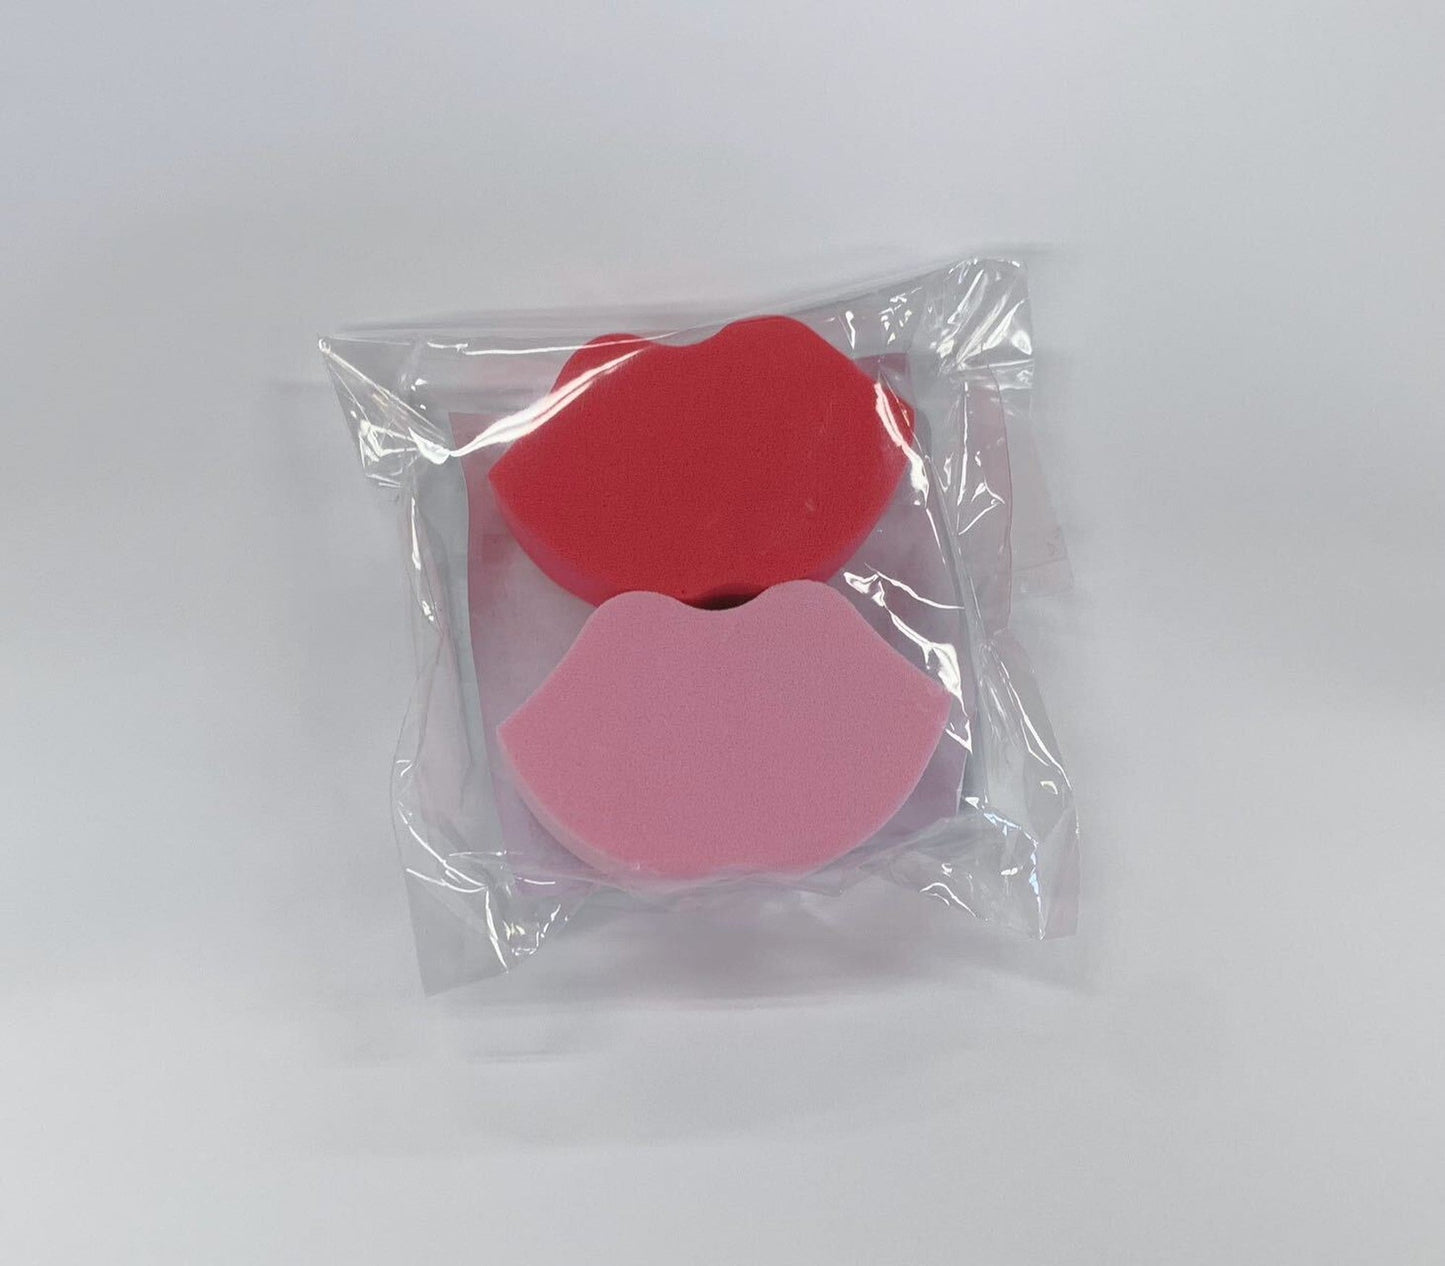 Foundation puff with water and without water, set of 2